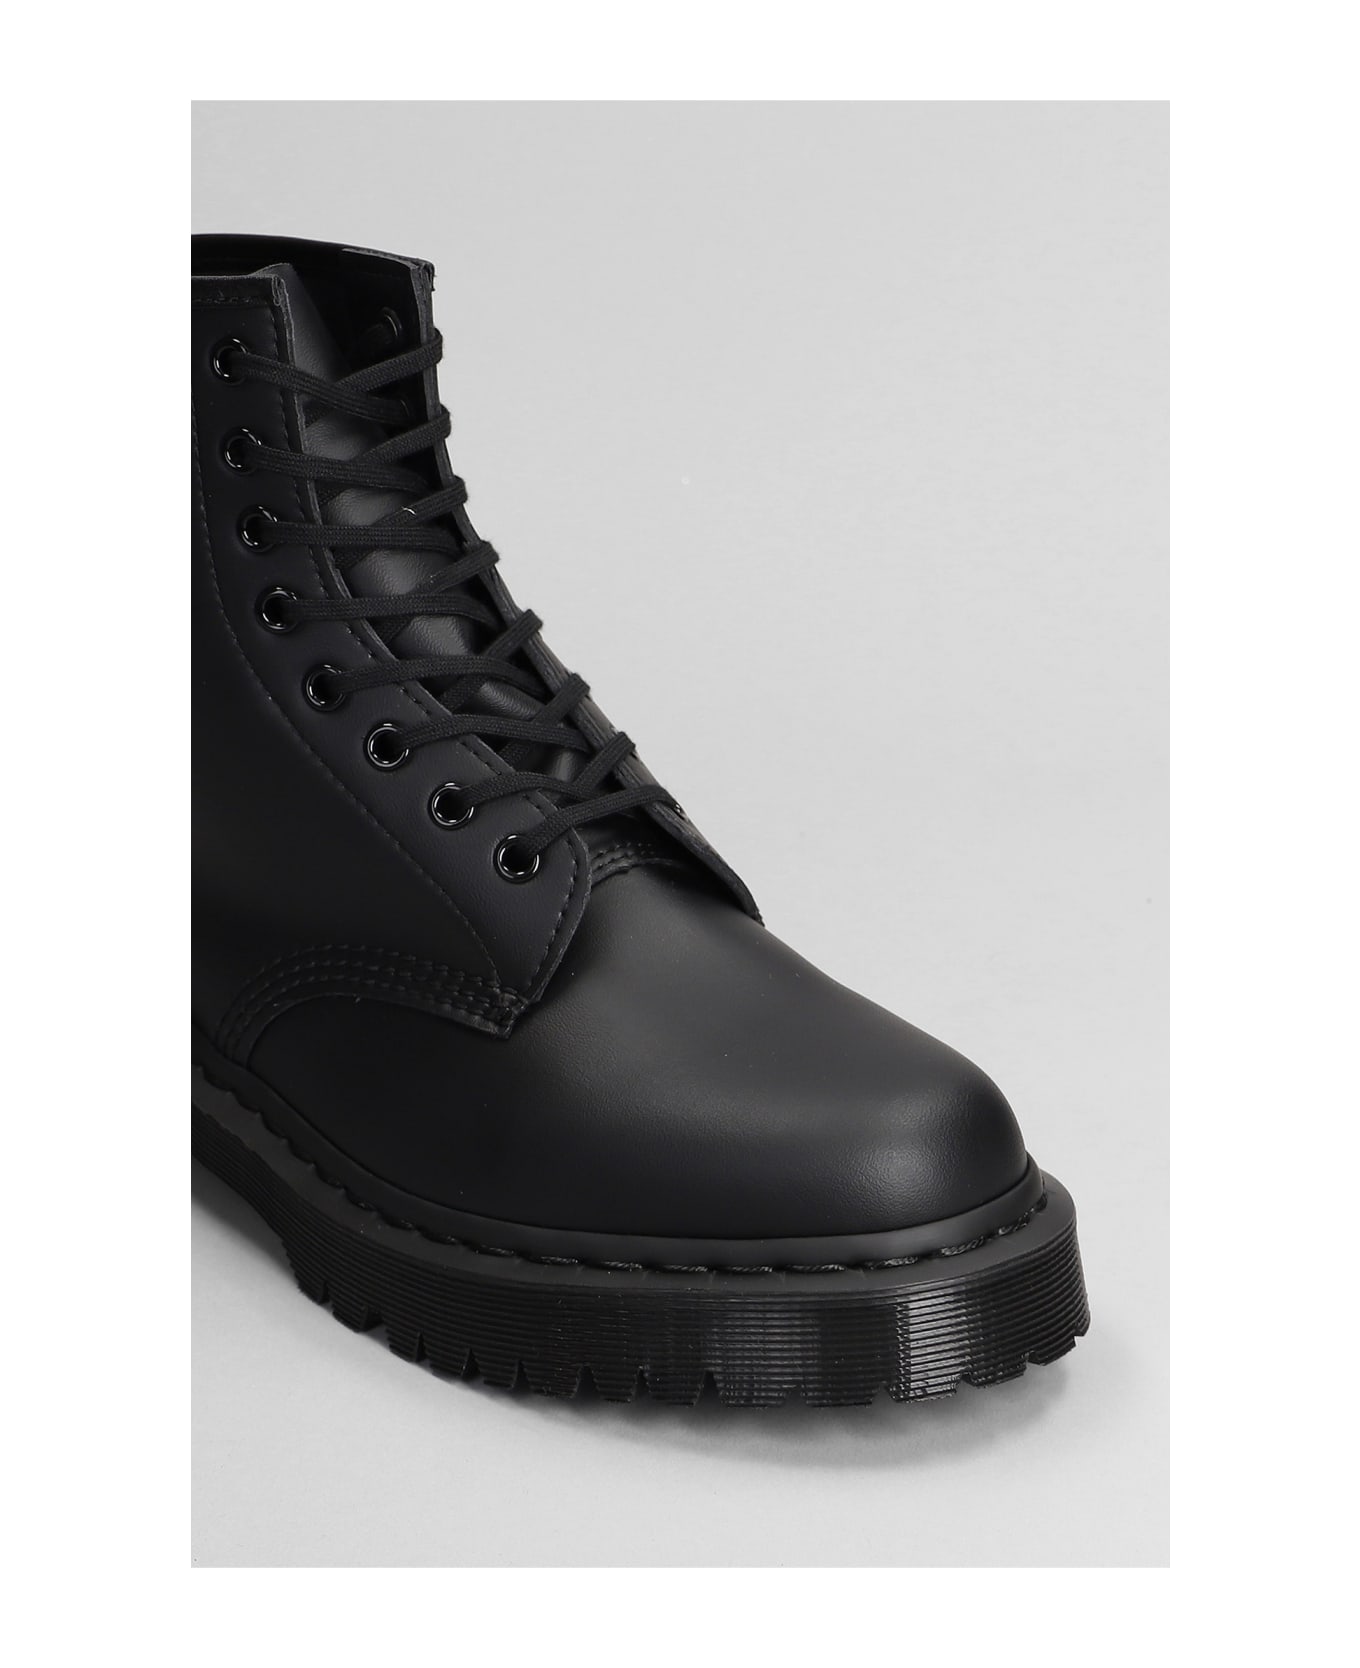 Dr. Martens 1460 Mono Combat Boots In Black Leather - black